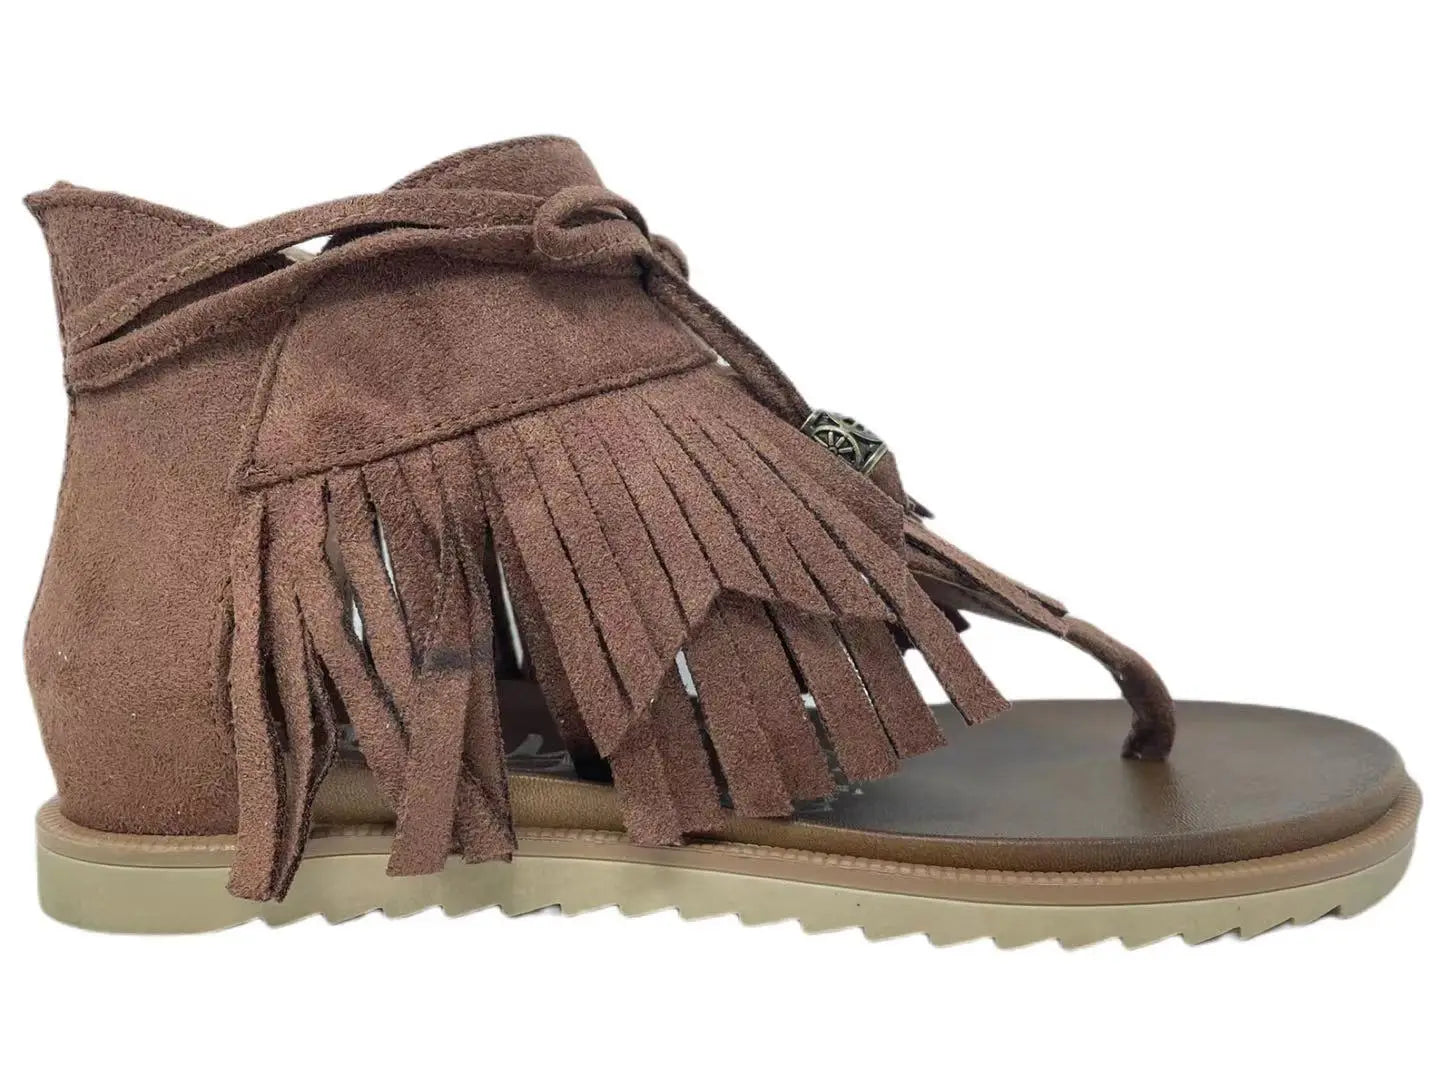 I see you Fringe Zipper back Very stylish A Must have Tan or Taupe microfiber suede fringe